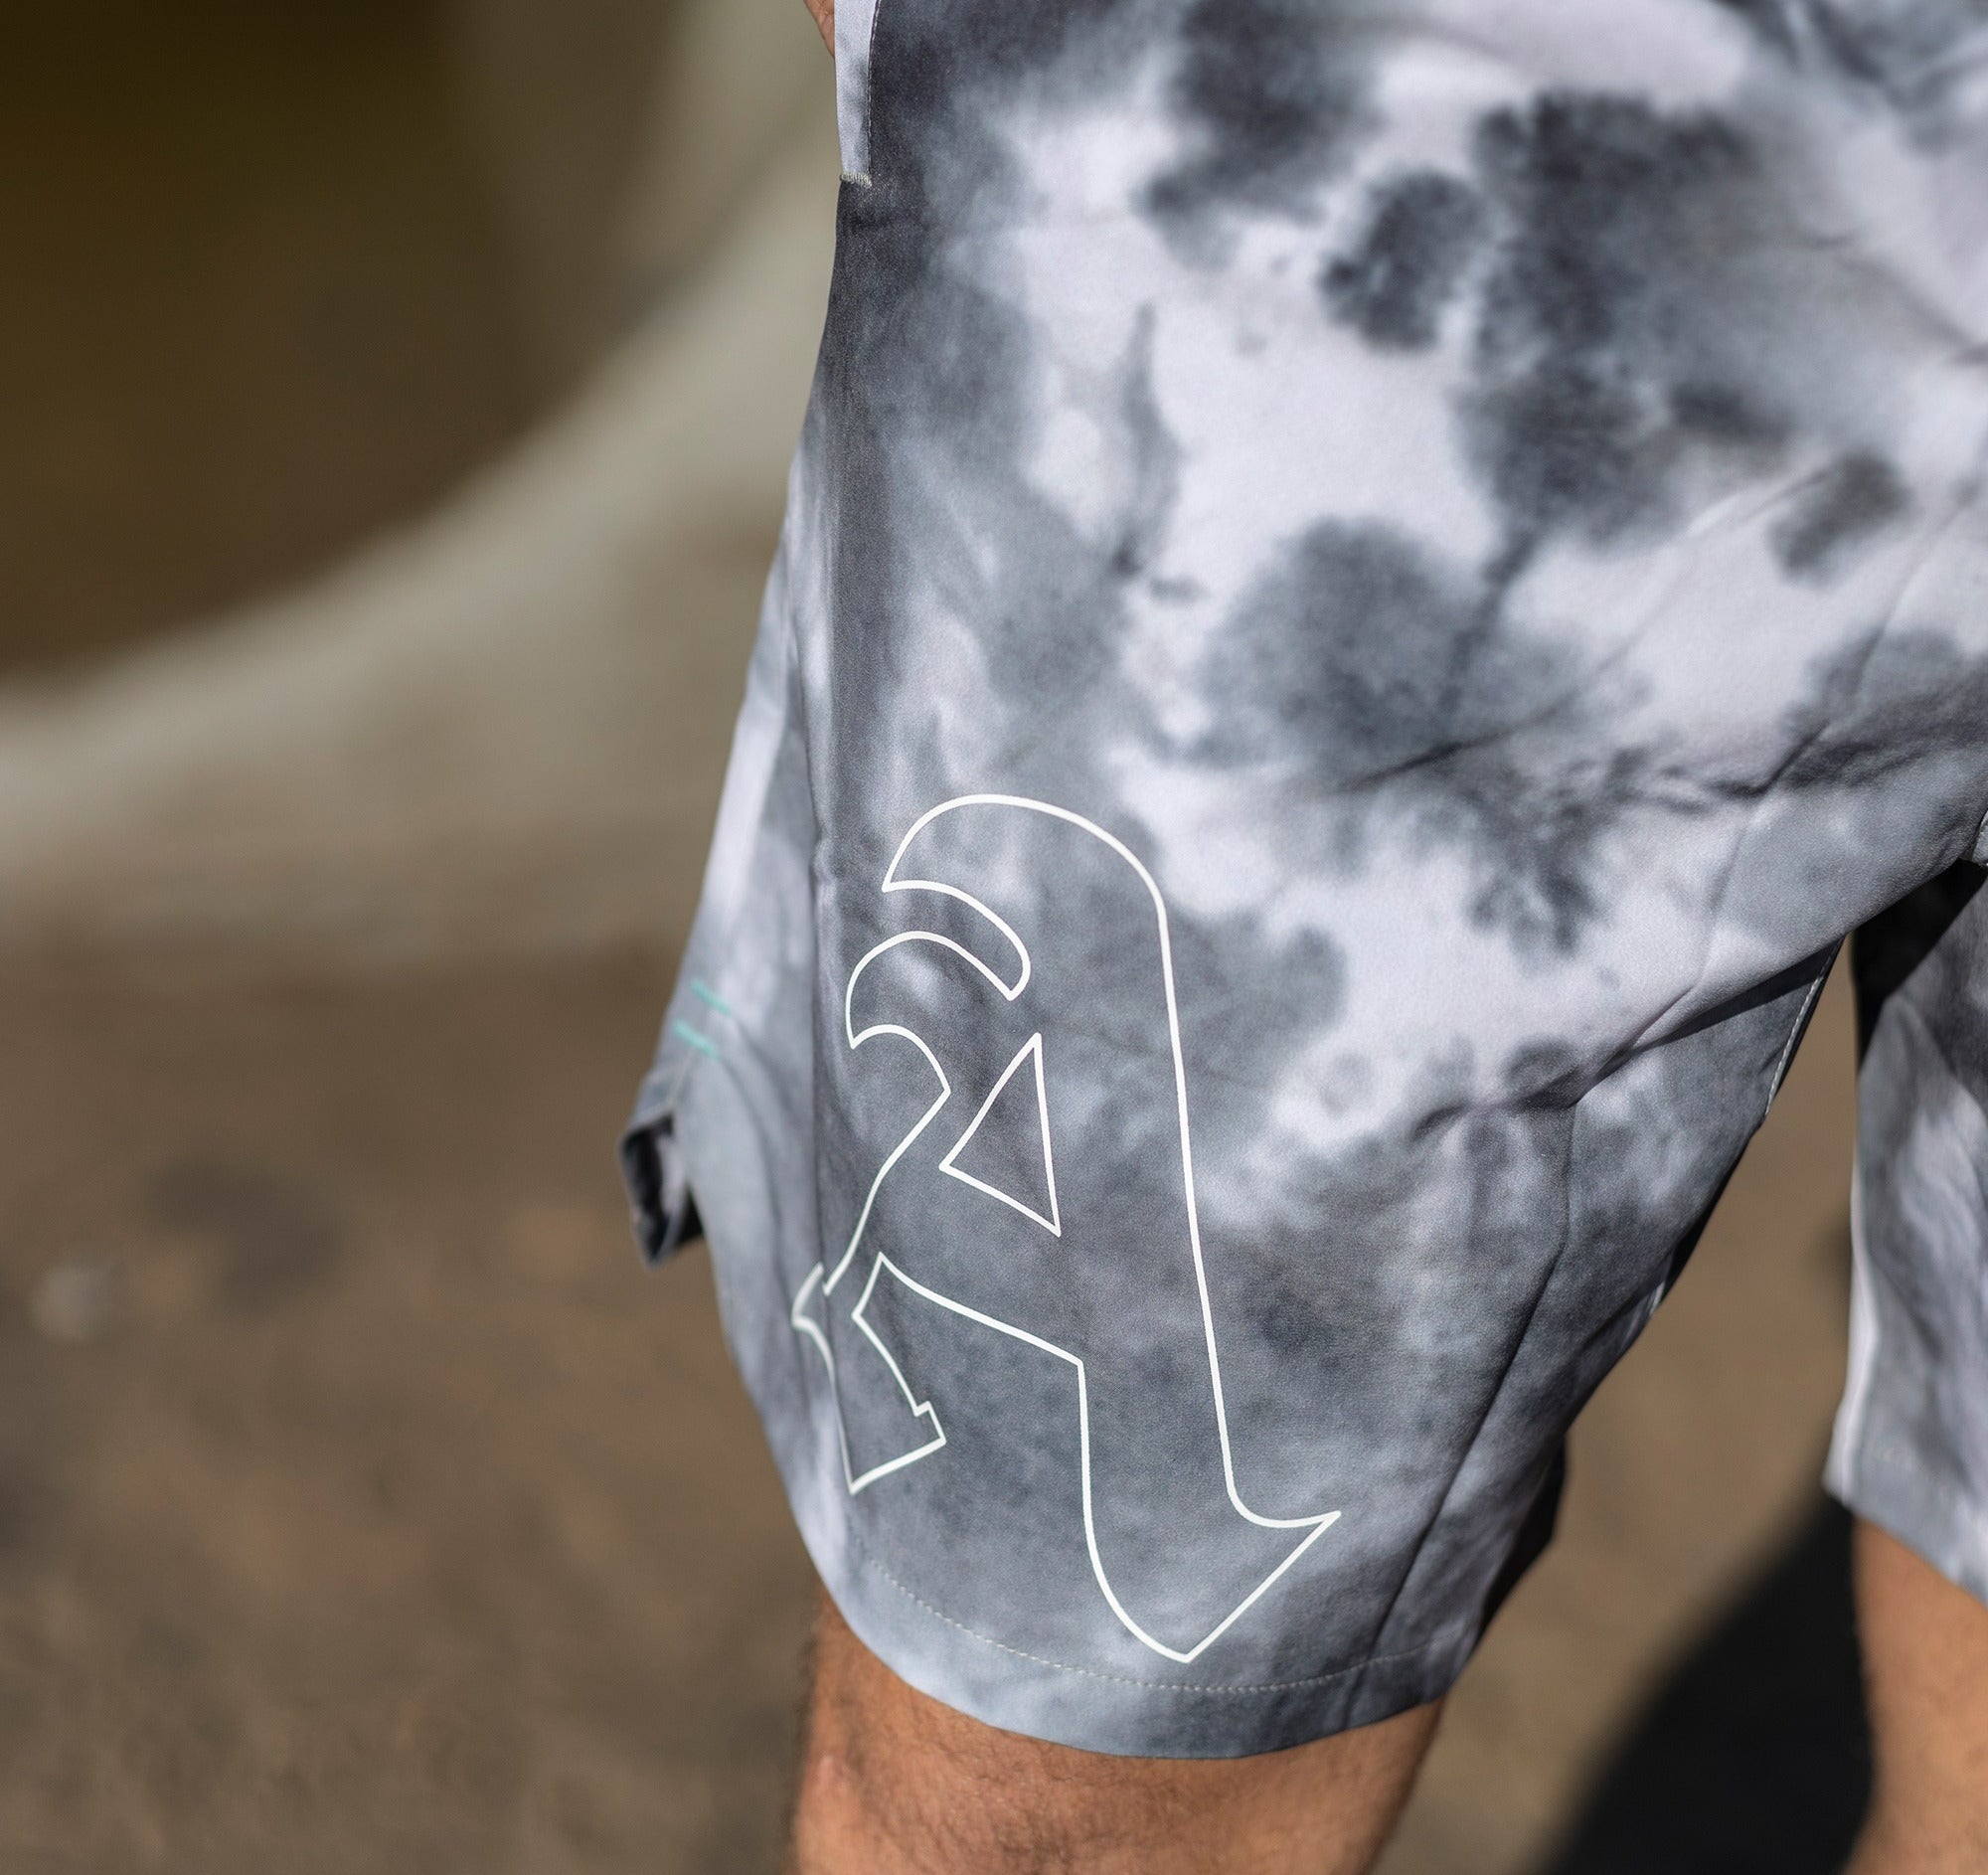 EXTREME FRONT CLOSE UP OF DETAIL PRINT OF SMOKE WATER CLOUD WASH TRAINING SHORTS WORN BY MODEL KEKOA.